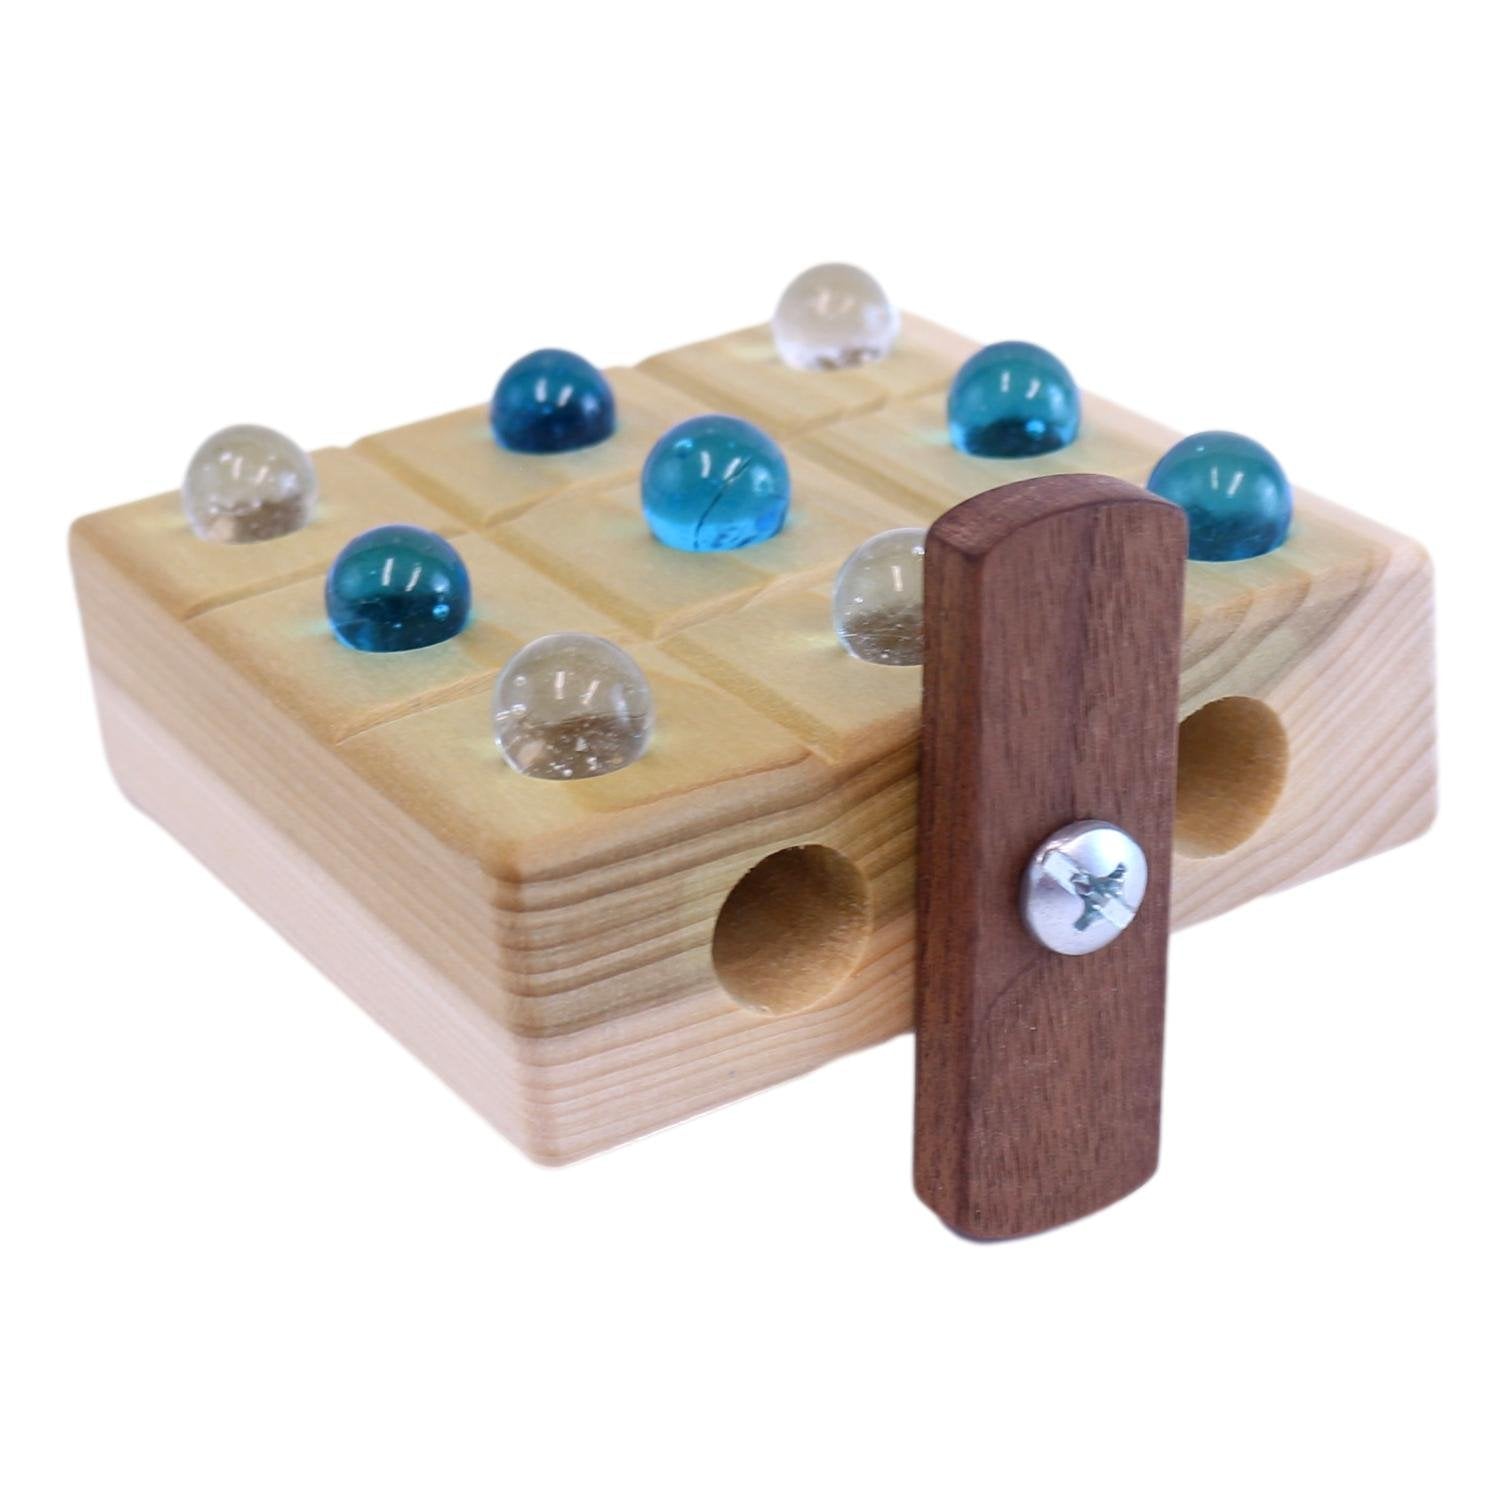 Wooden Tic-Tac-Toe Game - Toys you played with as a kid